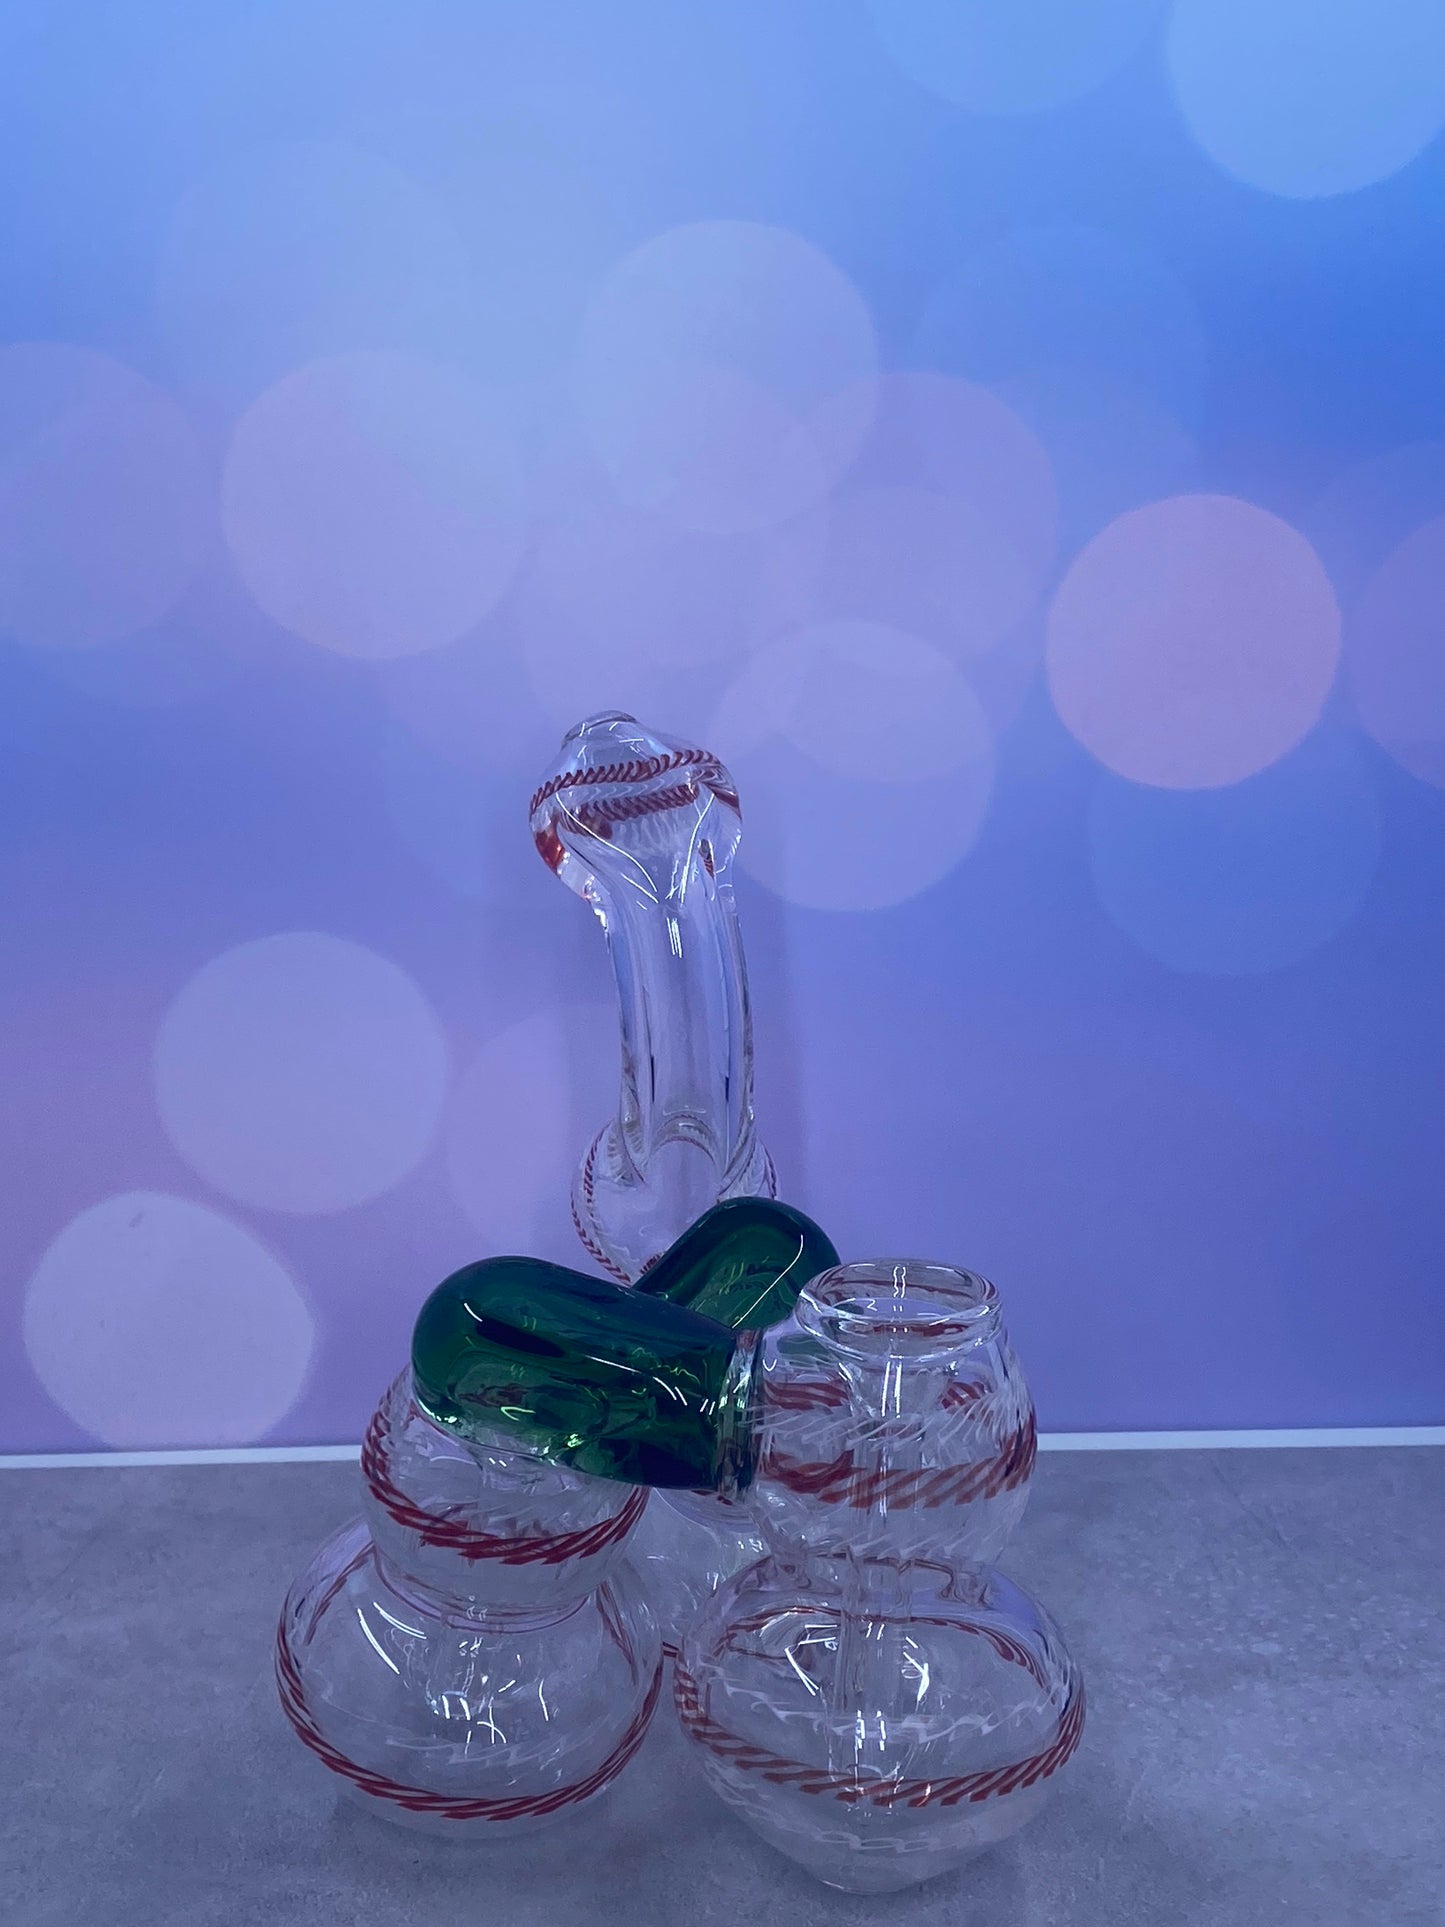 3 Piece Green and Red Bubbler yoga smokes yoga studio, delivery, delivery near me, yoga smokes smoke shop, find smoke shop, head shop near me, yoga studio, headshop, head shop, local smoke shop, psl, psl smoke shop, smoke shop, smokeshop, yoga, yoga studio, dispensary, local dispensary, smokeshop near me, port saint lucie, florida, port st lucie, lounge, life, highlife, love, stoned, highsociety. Yoga Smokes